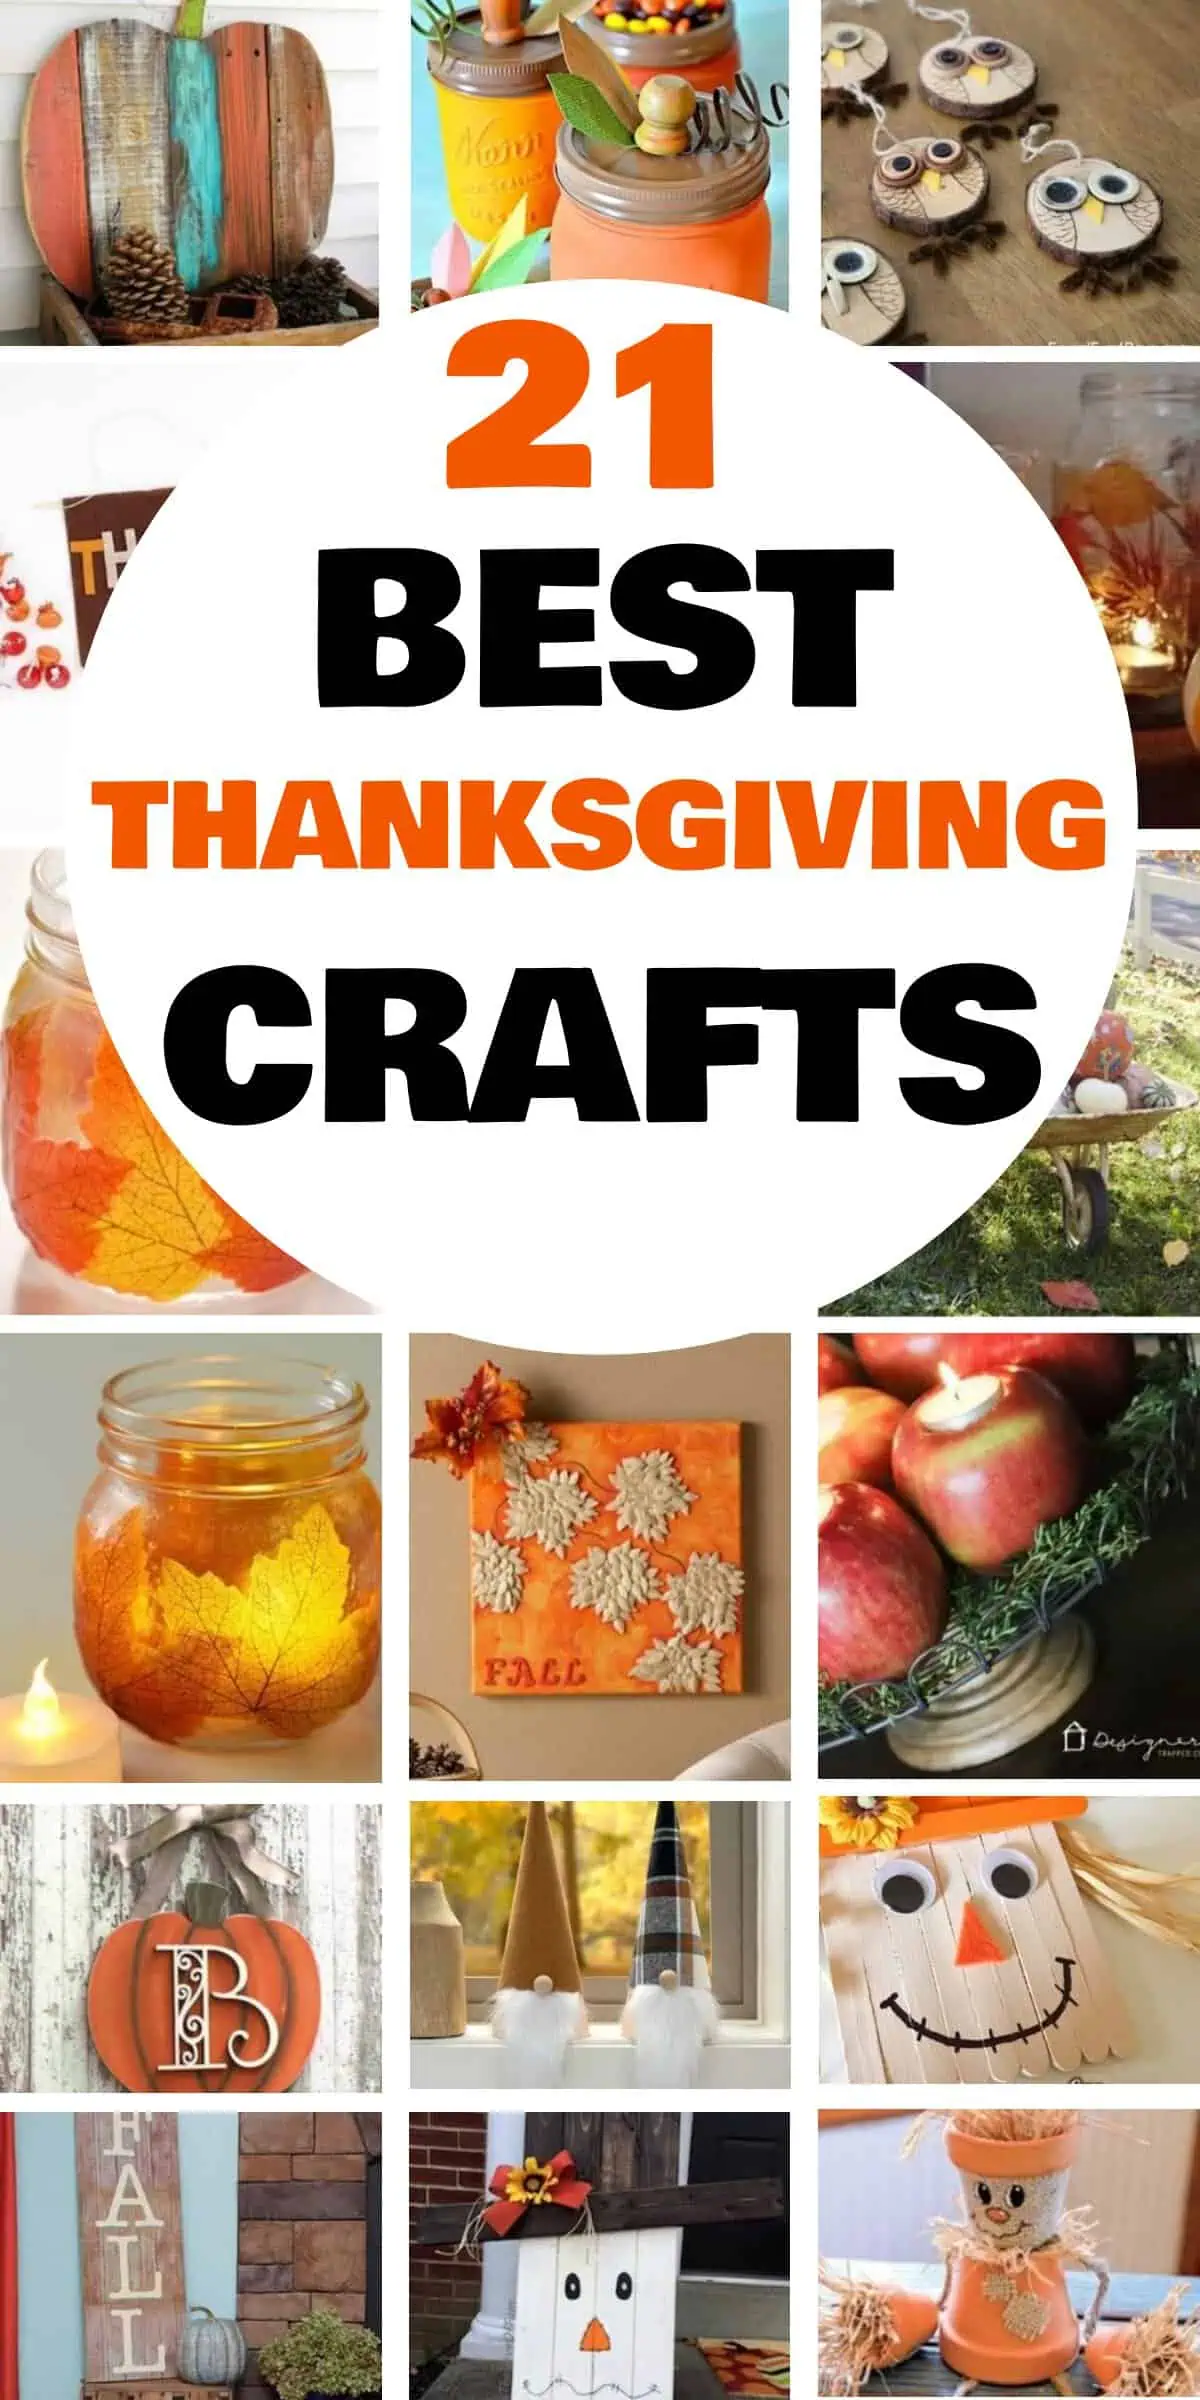 21 Best Thanksgiving Crafts for Adults